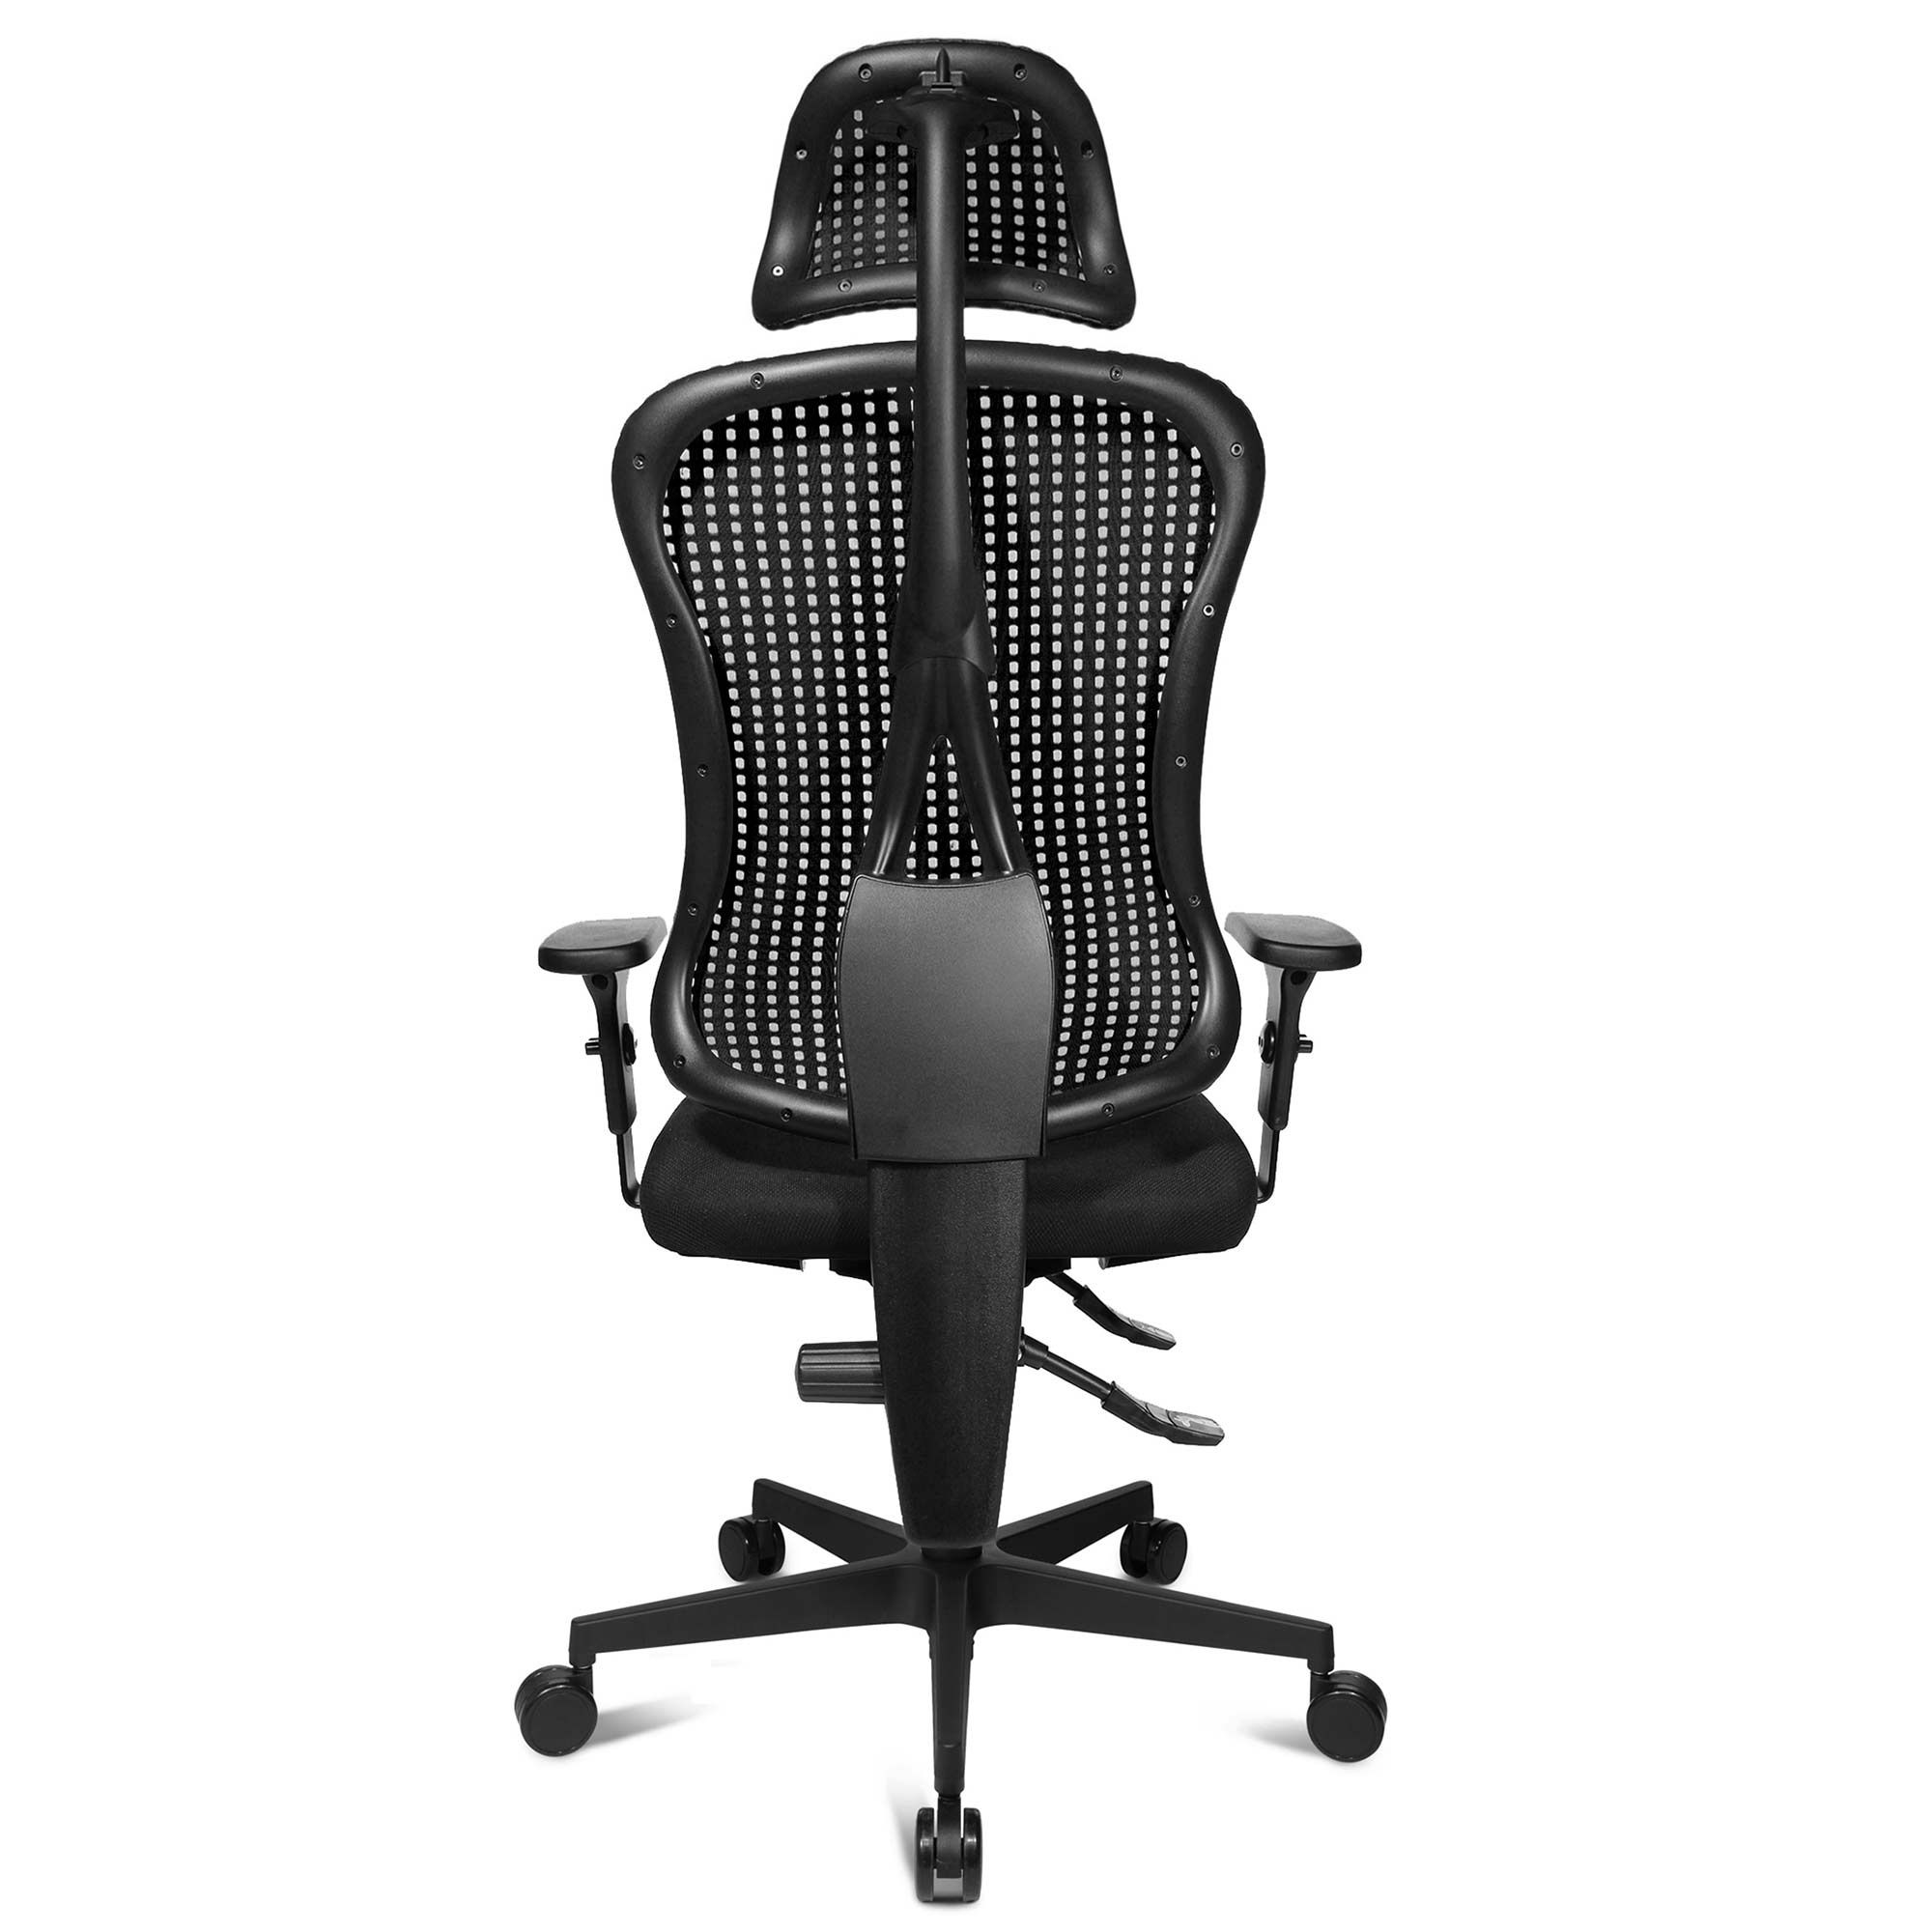 Sitness 90 Orthopaedic Office Chair Black - Office Chairs - Meubles